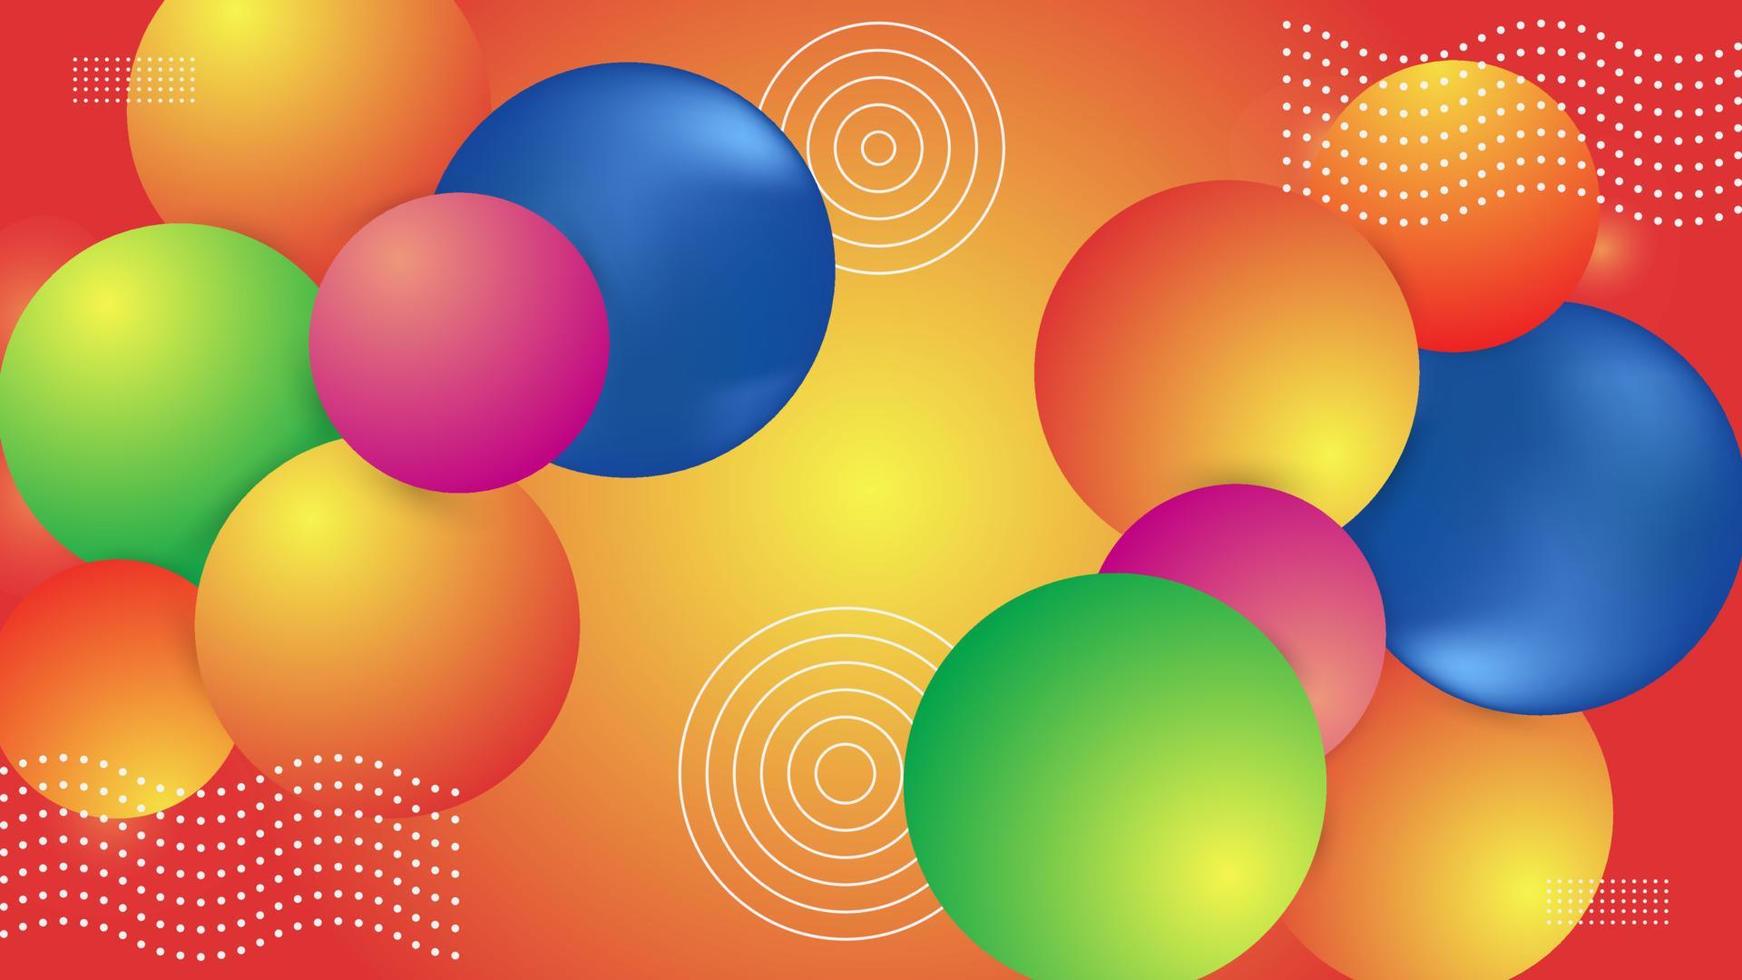 Creative 3d circles abstract background vector